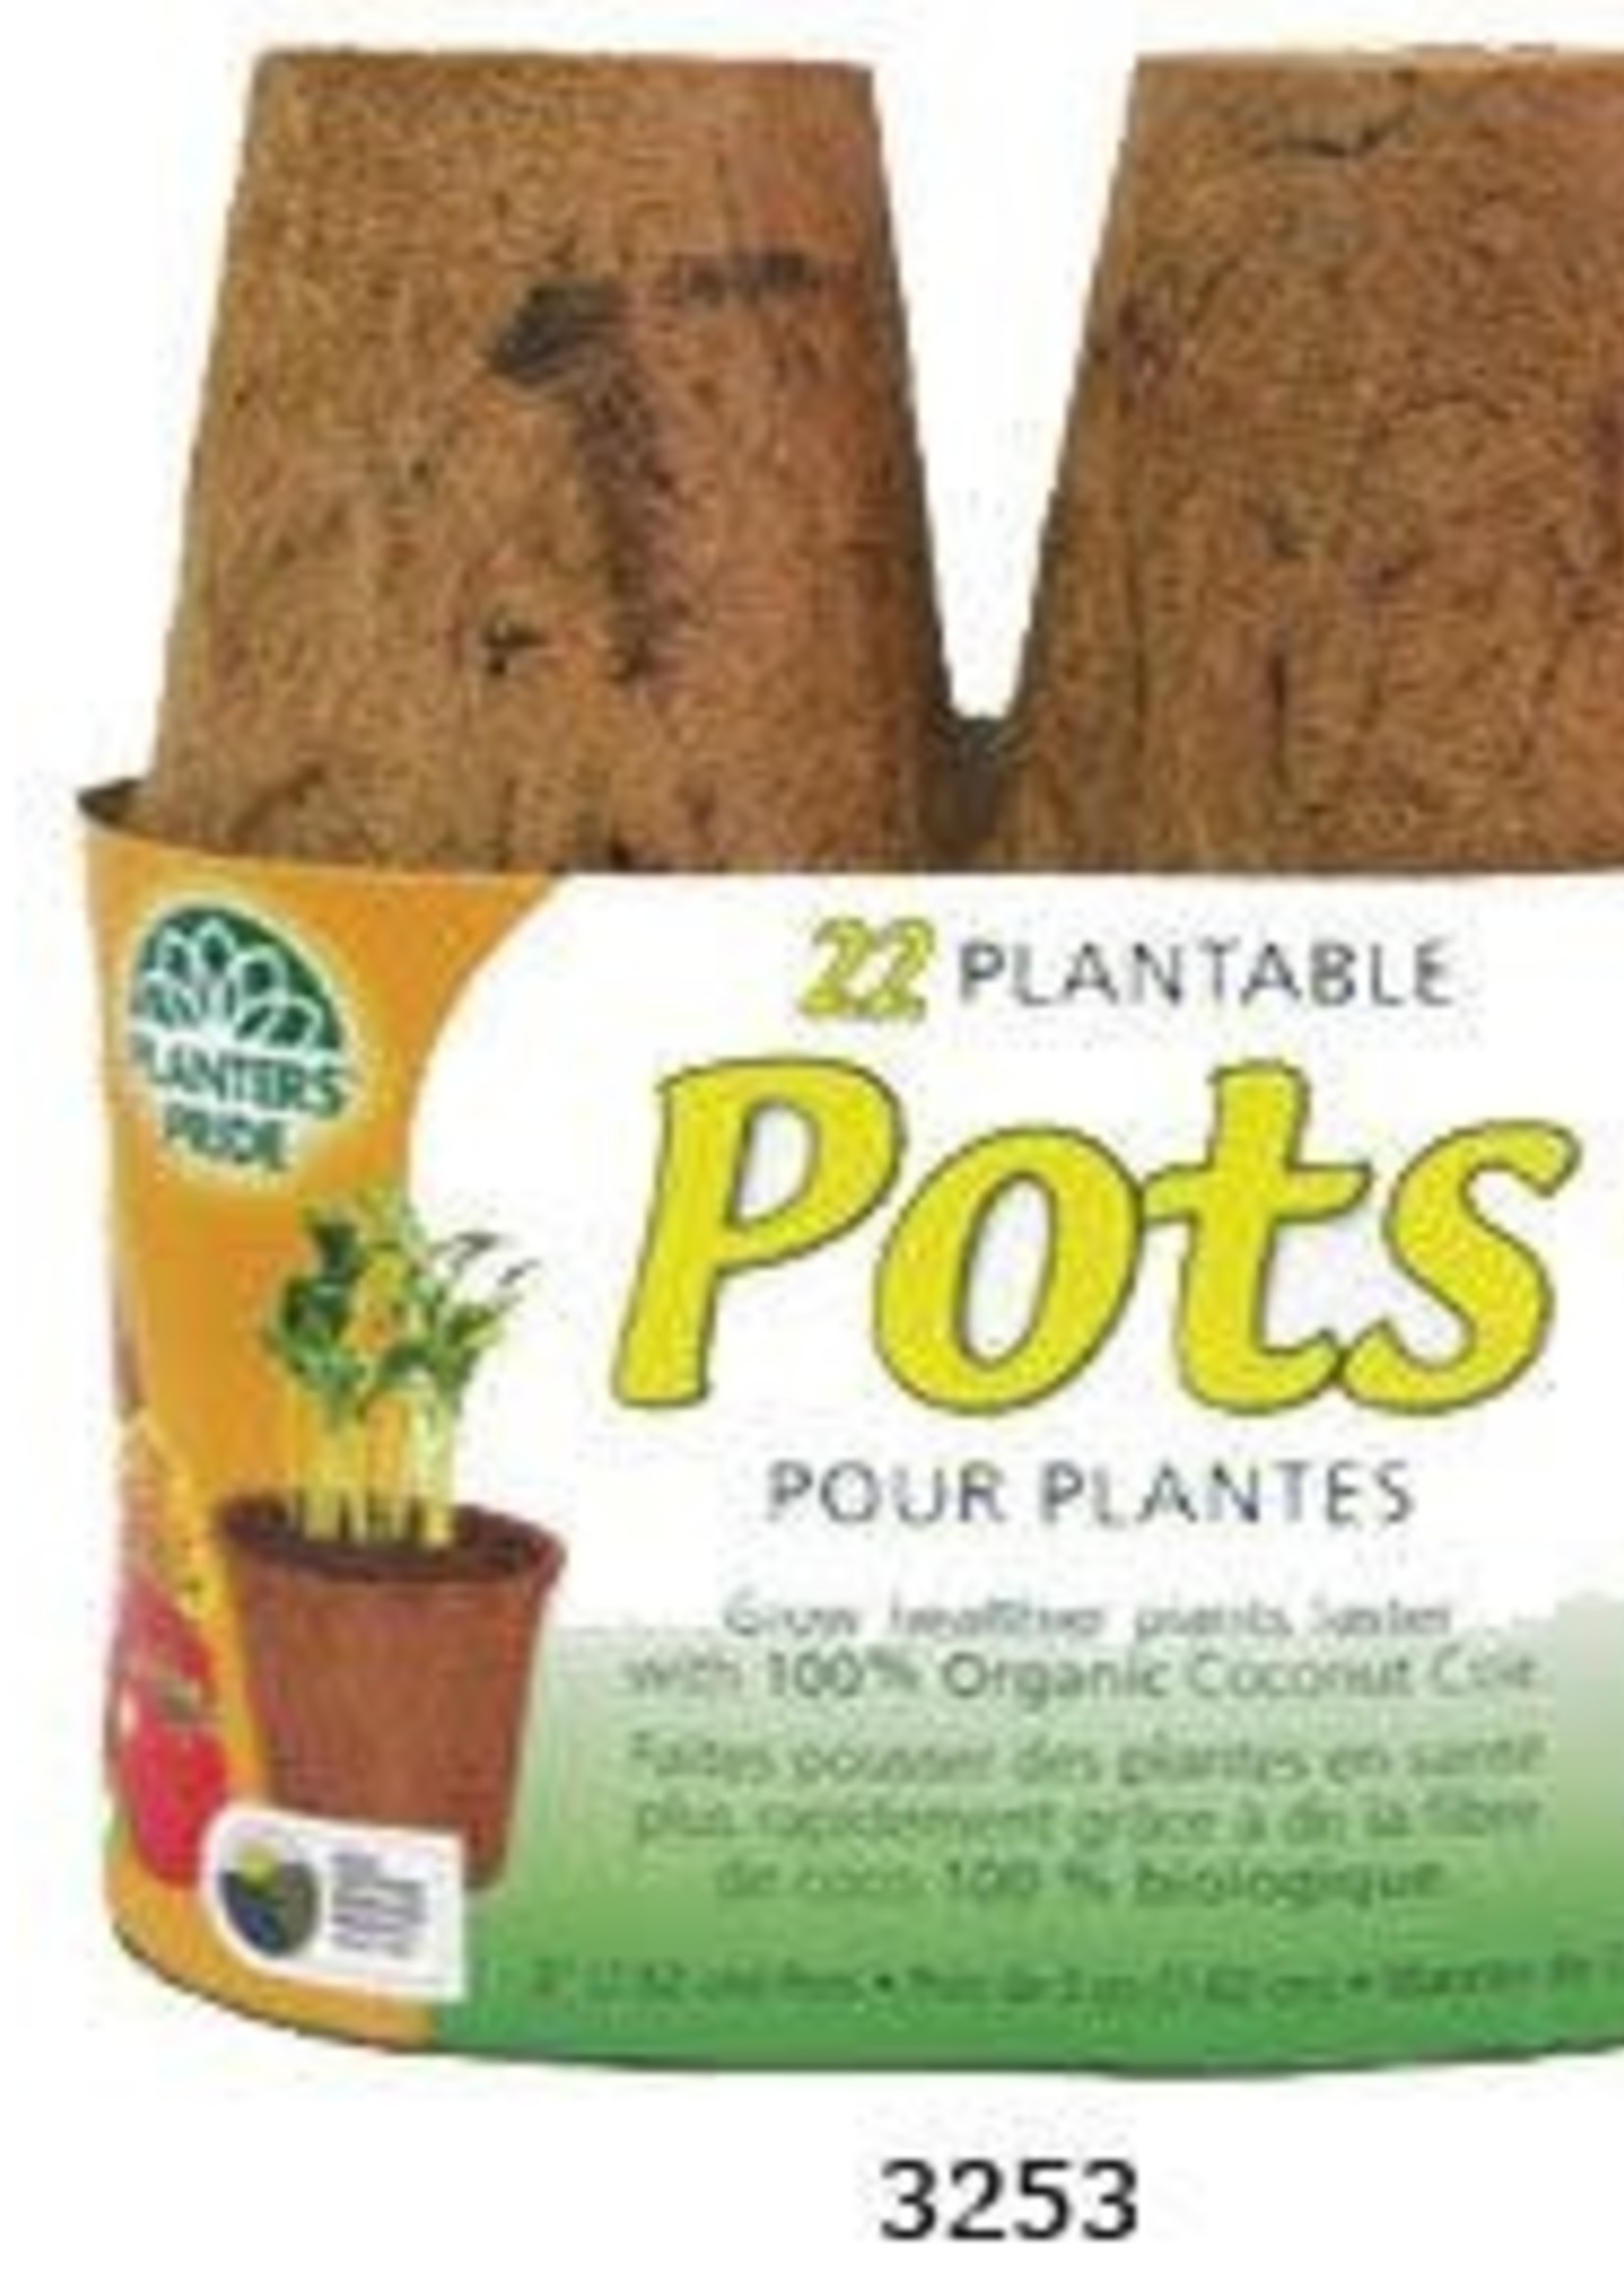 Plantbest 3 in Coco Coir Pots - 22 Pack